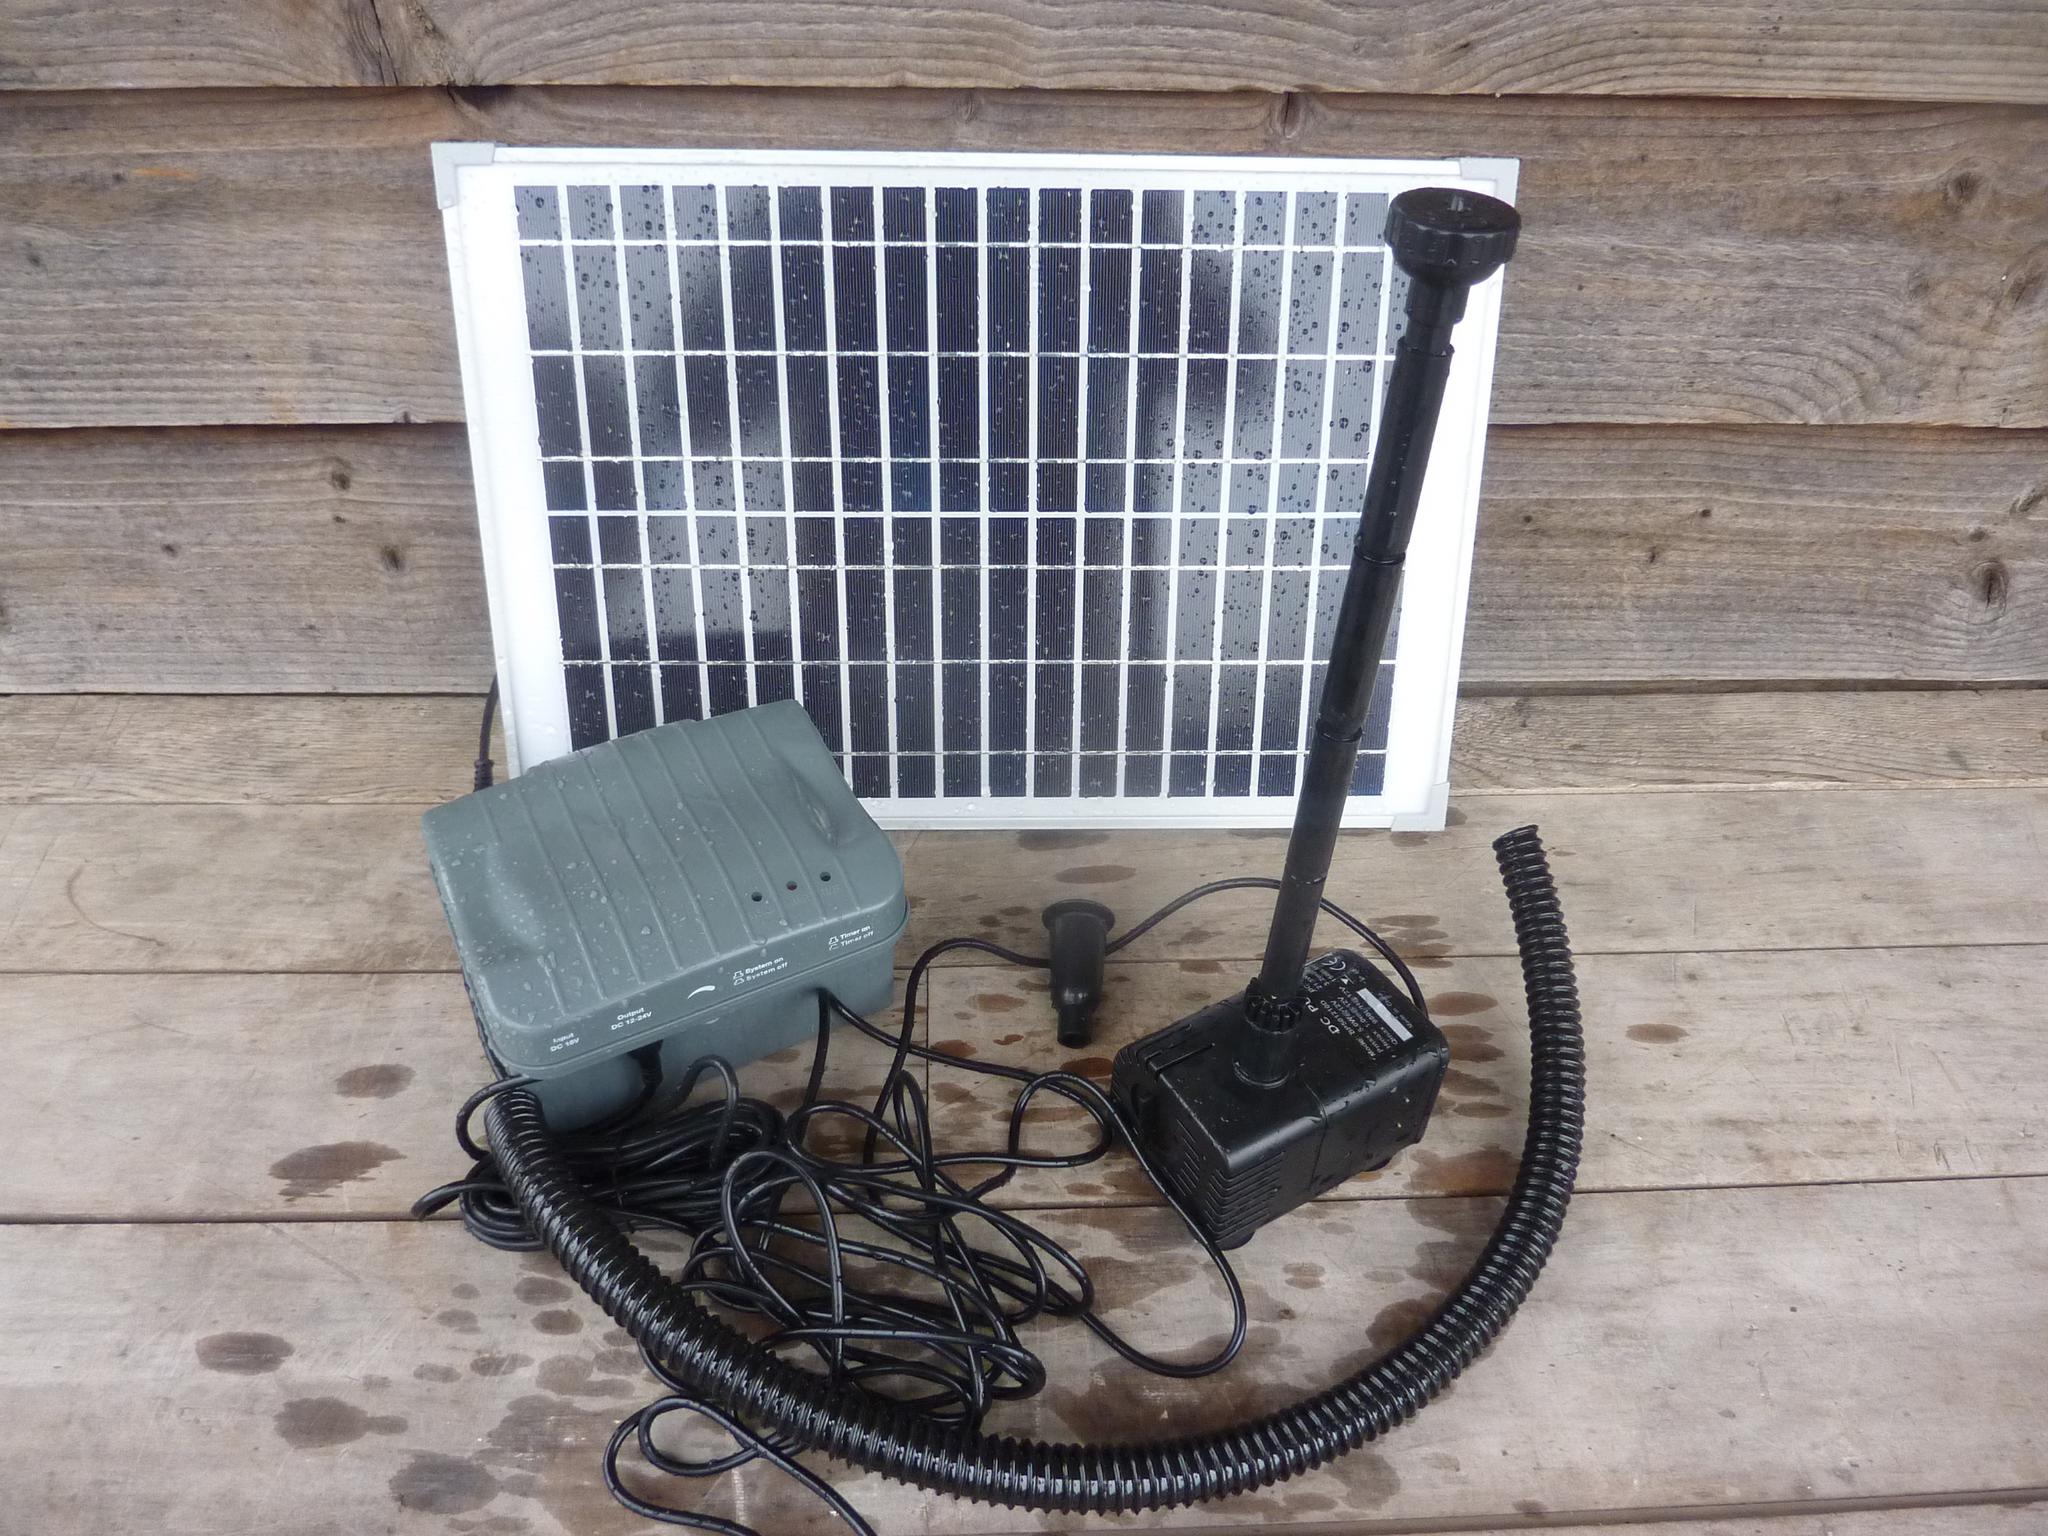 SOLAR WATER FEATURE KIT WITH BATTERY BACK UP Aqua 2021 to AQUA, the UK's dedicated